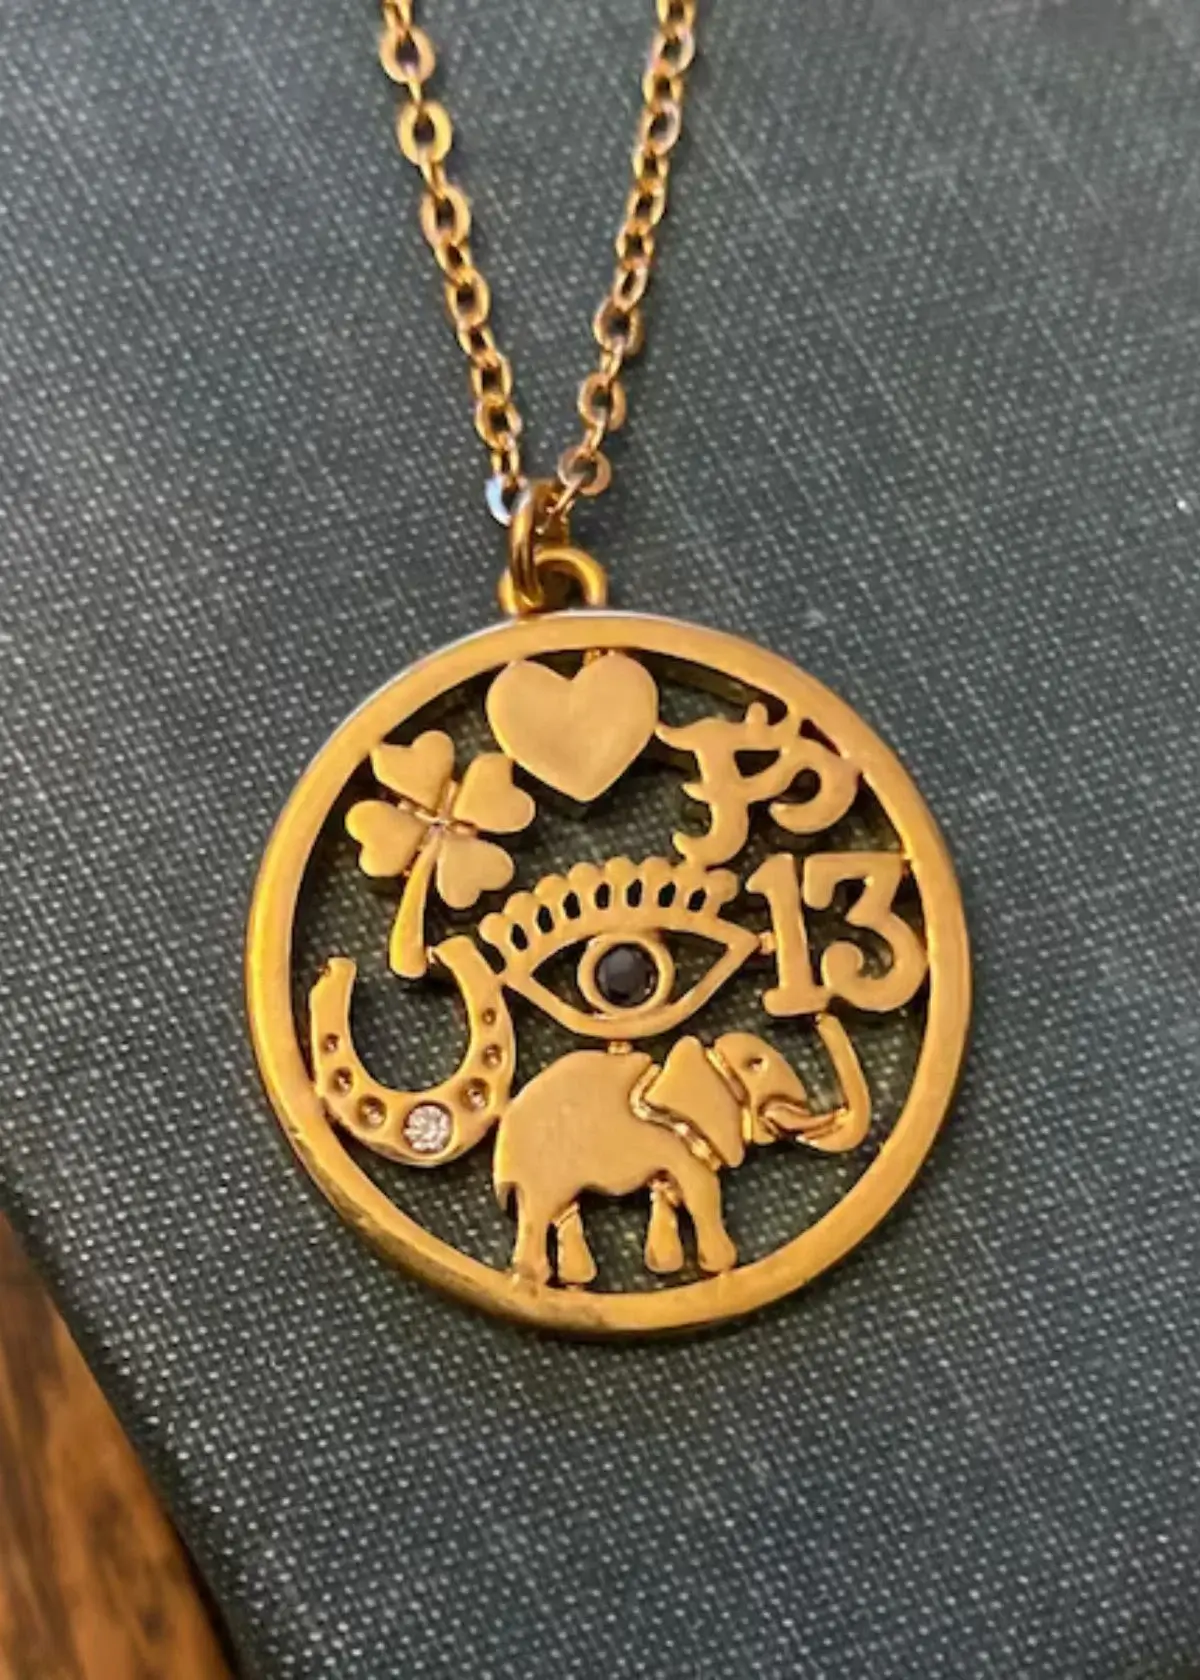 What are some common symbols used in lucky charm necklaces?